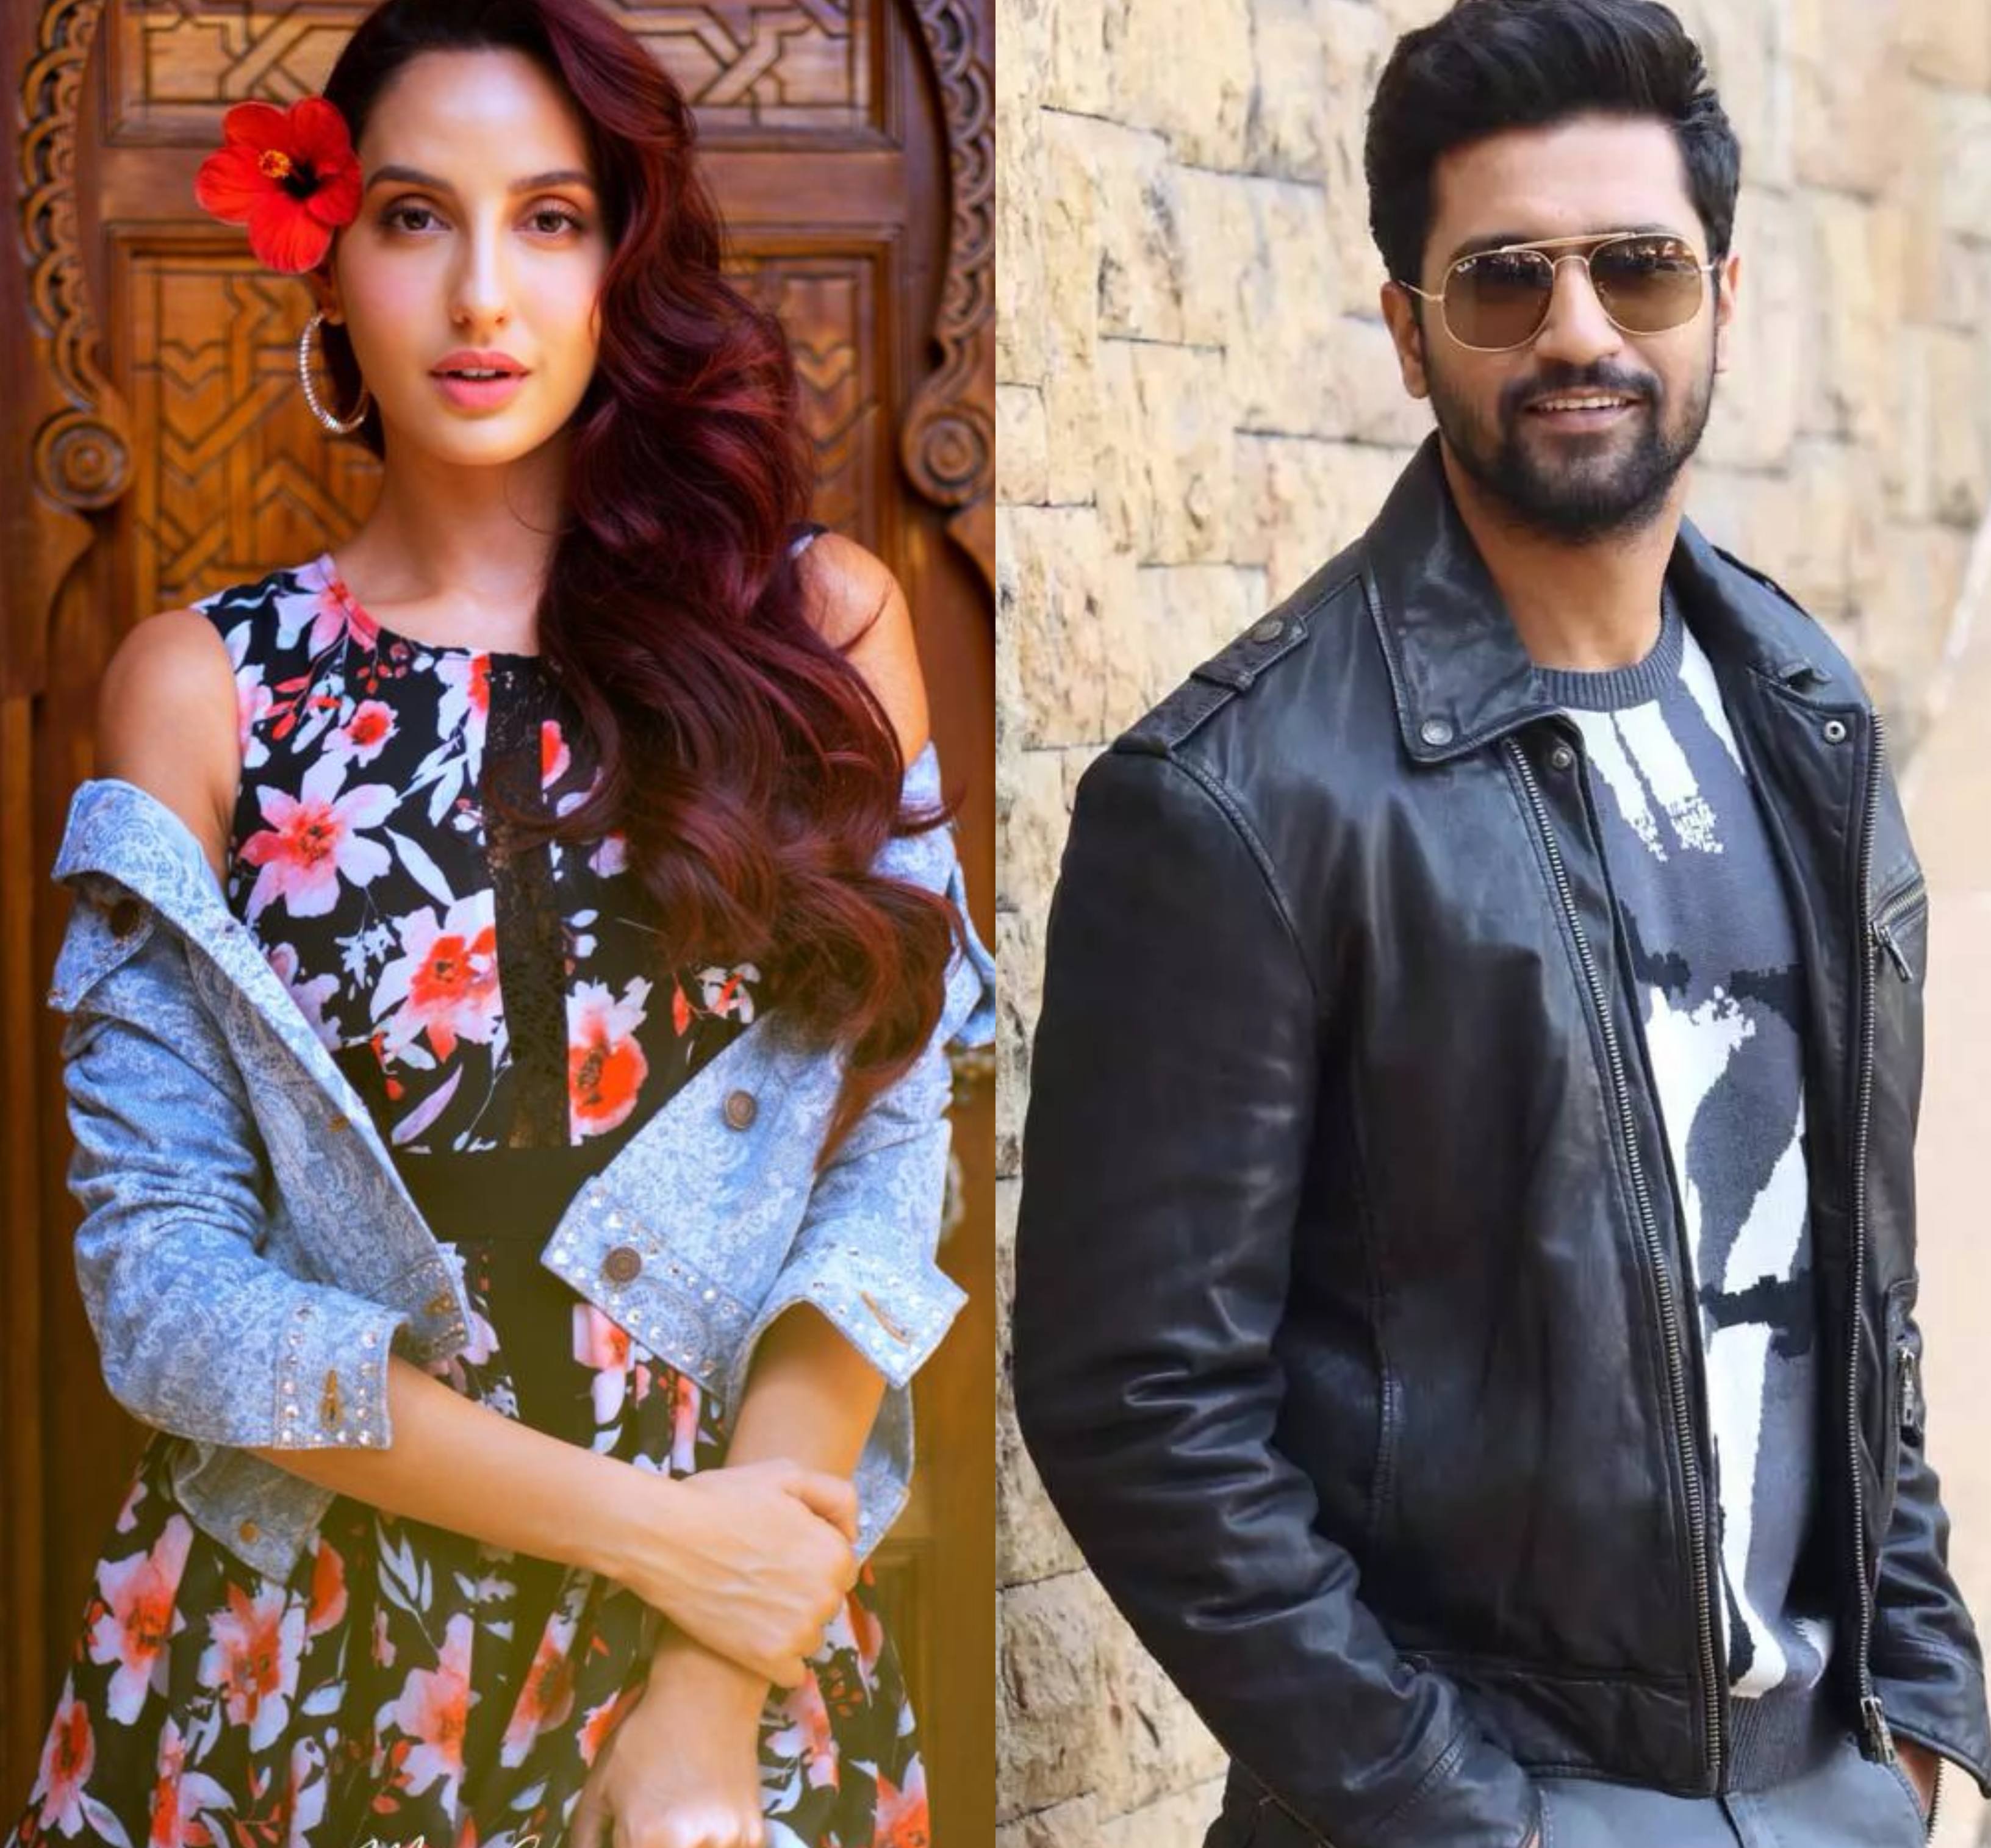 Nora Fatehi To Appear Alongside Vicky Kaushal In A Music Video